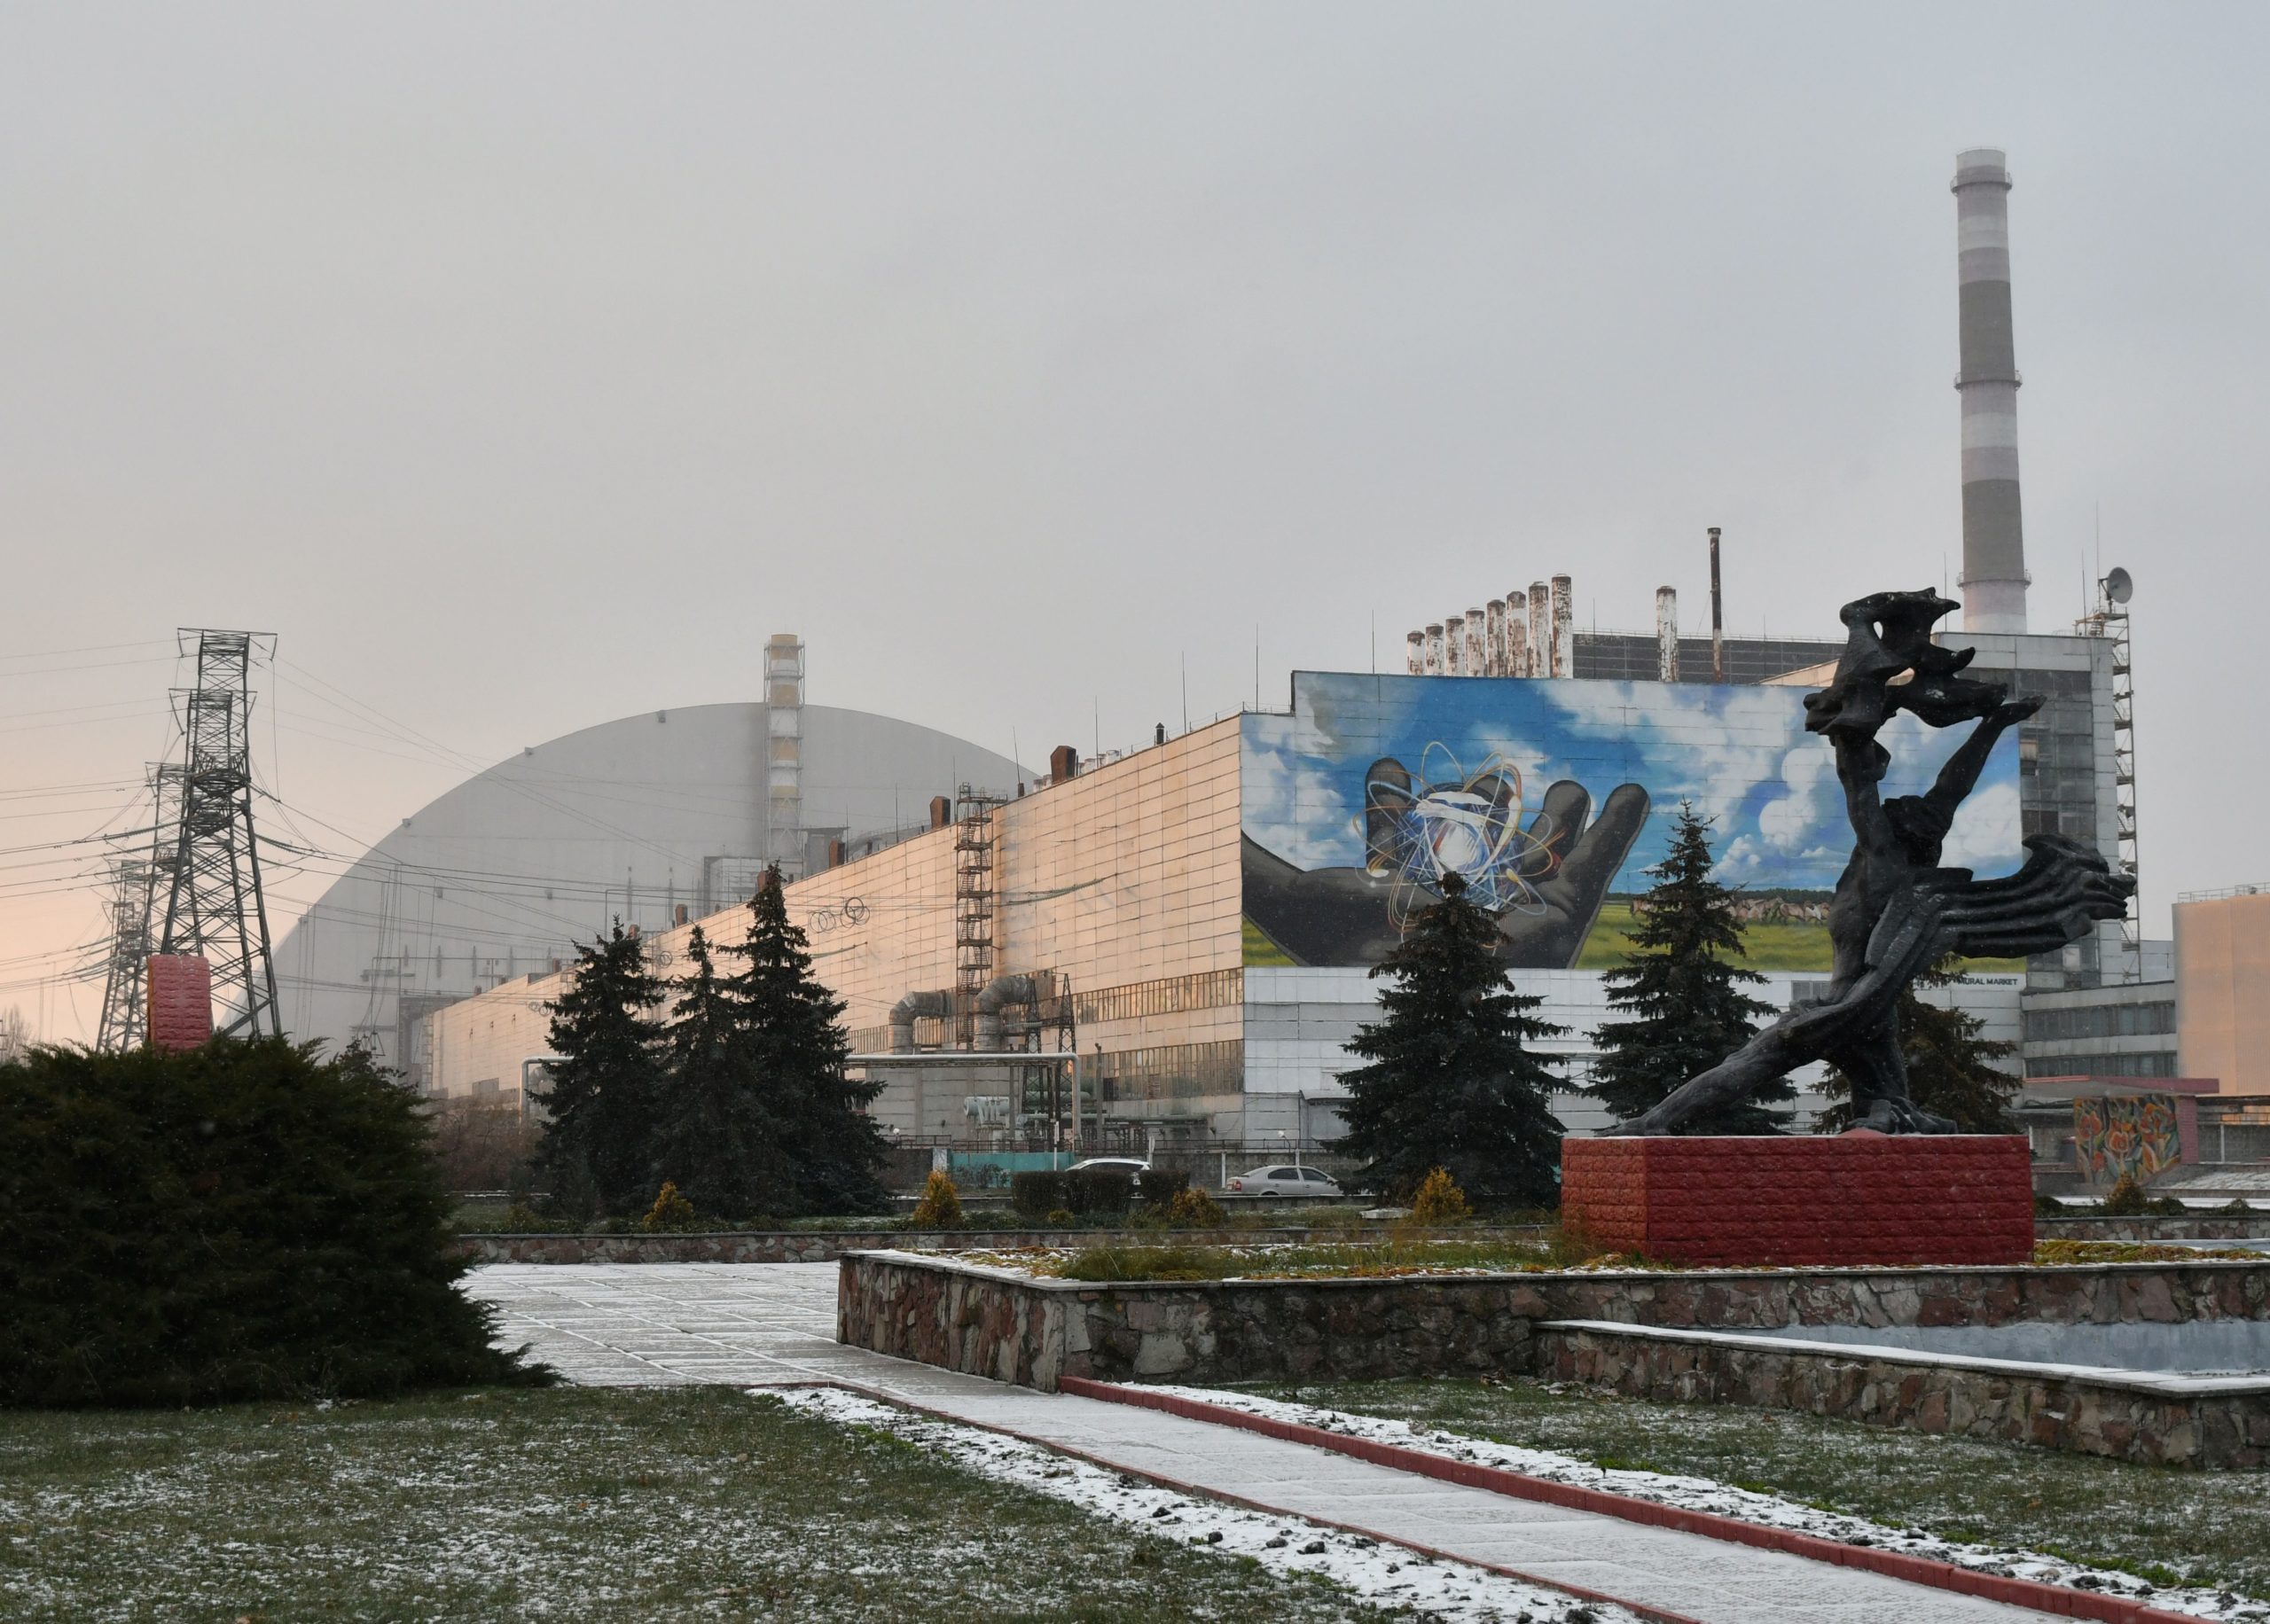 This photograph taken on December 8, 2020 shows a monument in front of the giant protective dome built over the sarcophagus of the destroyed fourth reactor of Chernobyl nuclear power plant. - More than three decades after the Chernobyl nuclear disaster forced thousands to evacuate, there is an influx of visitors to the area that has spurred officials to seek official status from UNESCO. Officials hope recognition from the UN's culture agency will boost the site as a tourist attraction and in turn bolster efforts to preserve ageing buildings nearby. (Photo by GENYA SAVILOV / AFP) (Photo by GENYA SAVILOV/AFP via Getty Images)